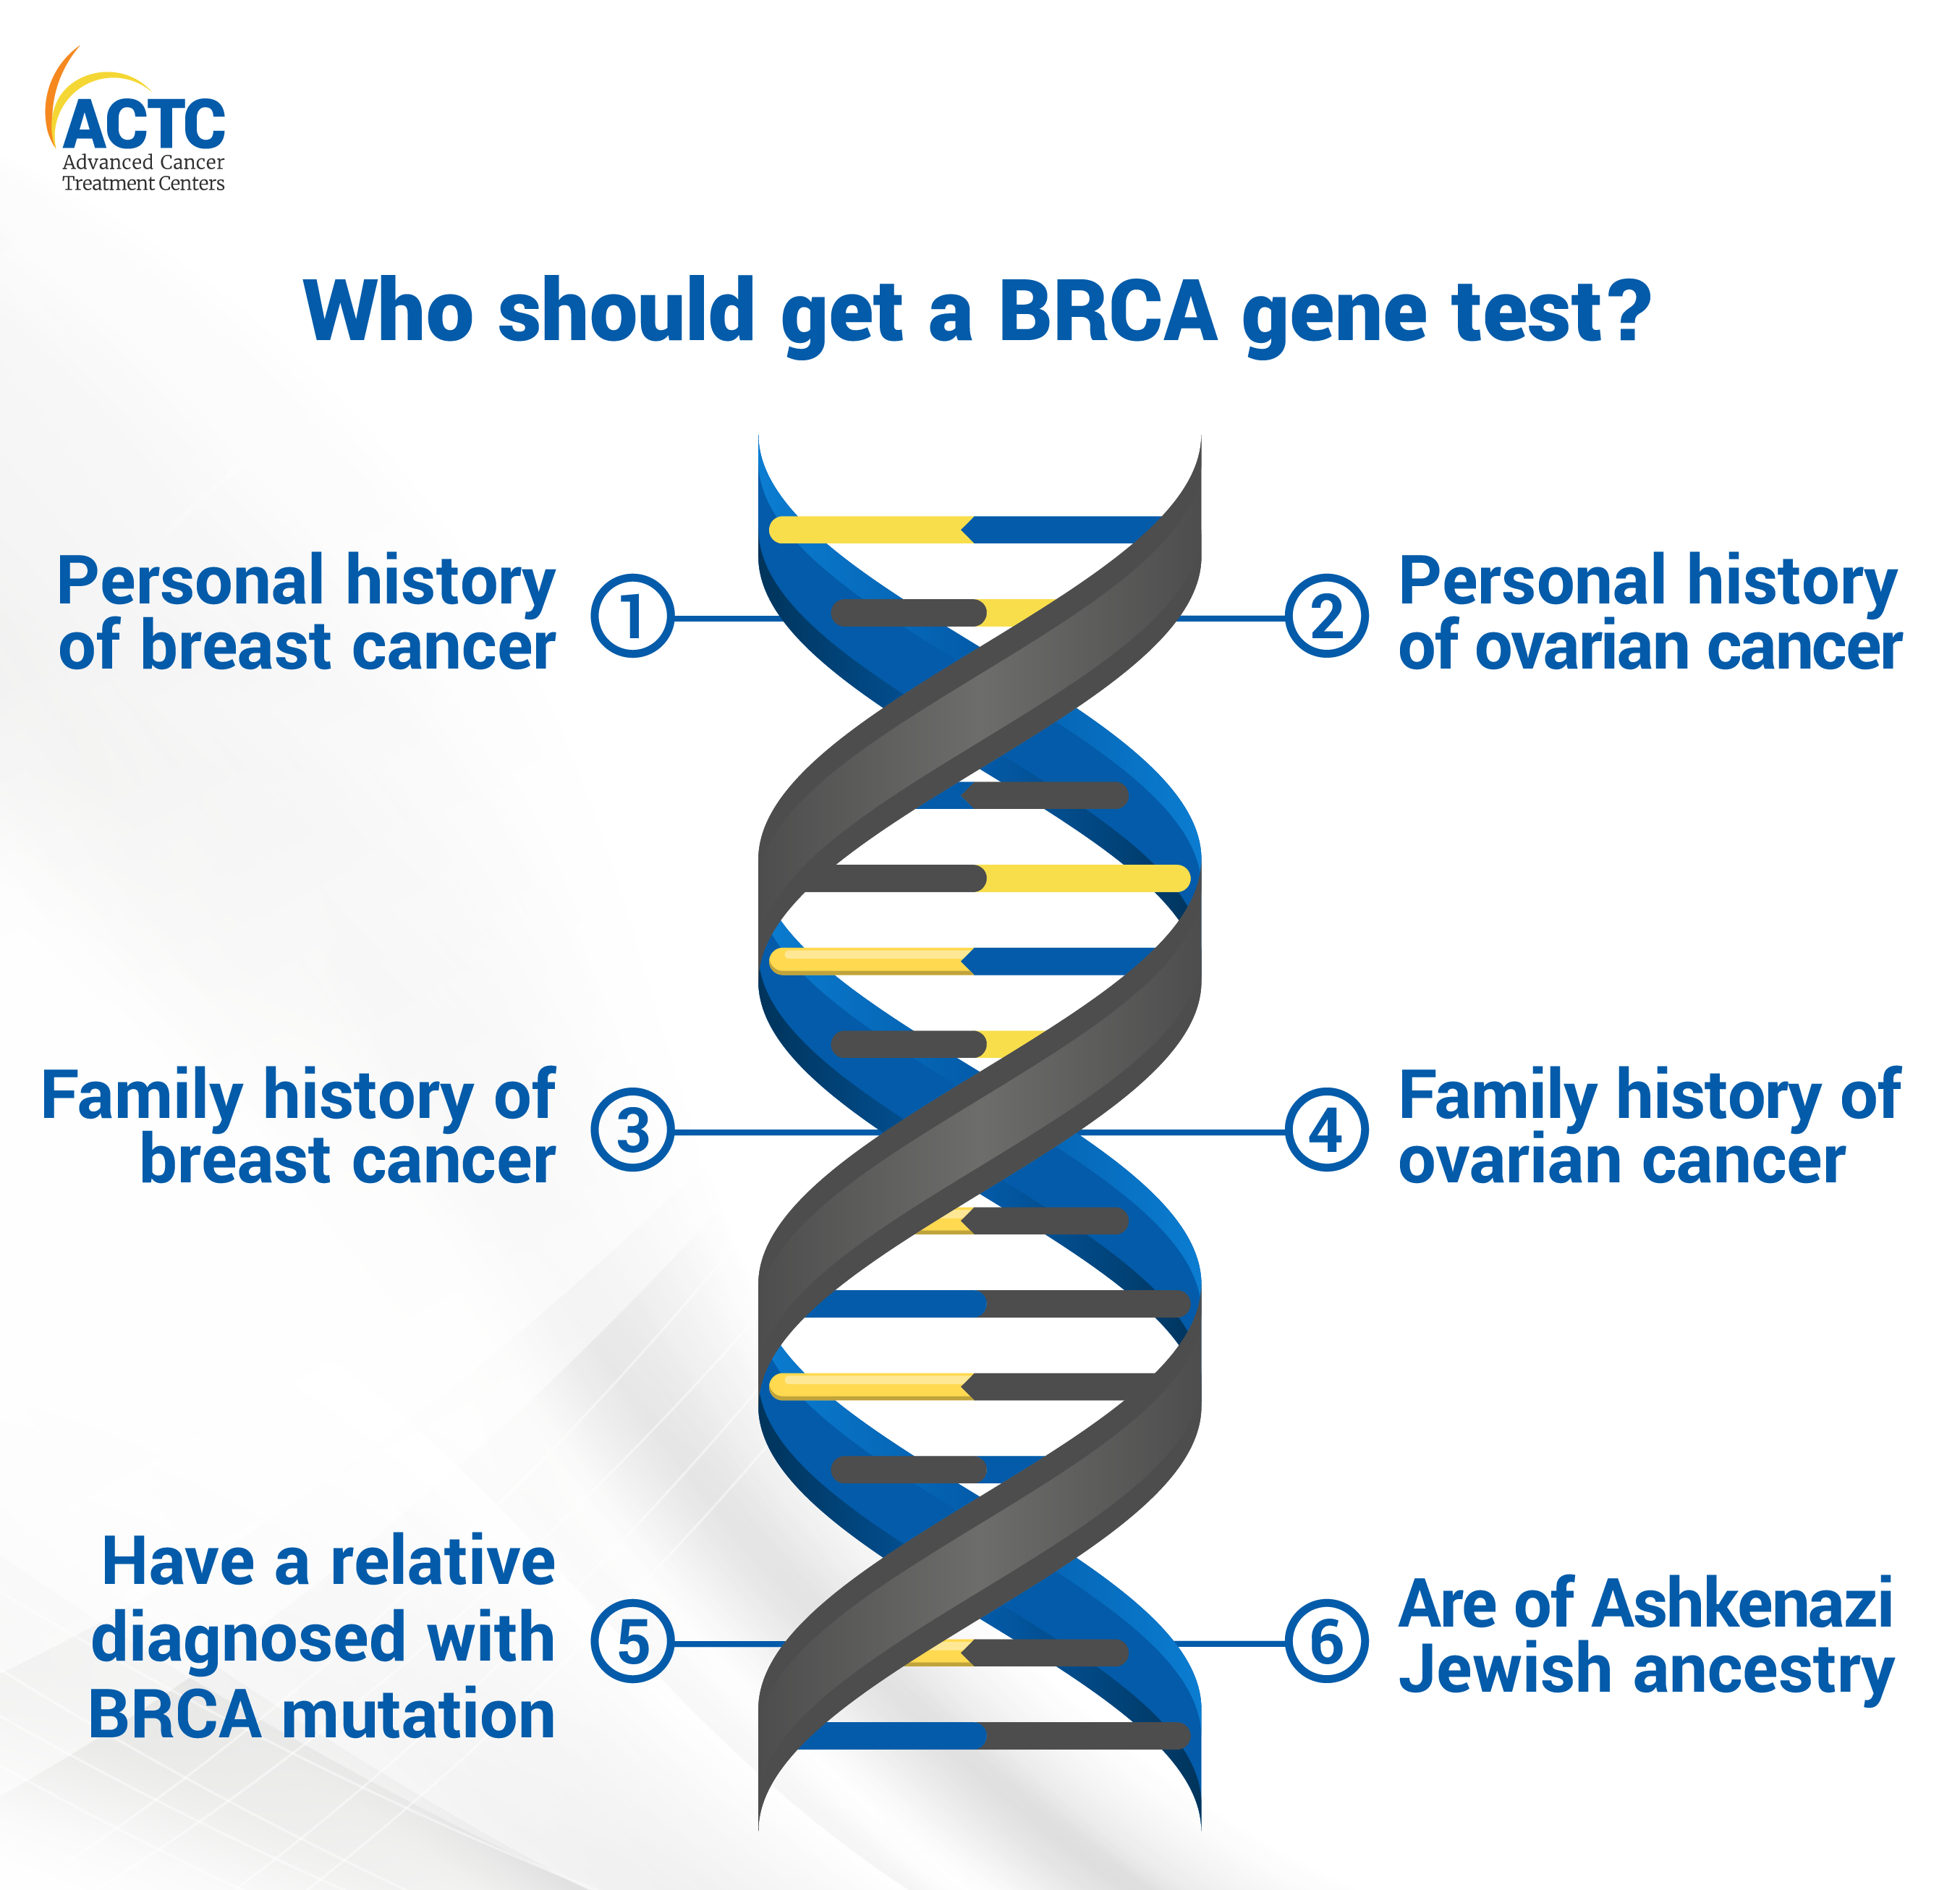 Who should get the BRCA gene testing done